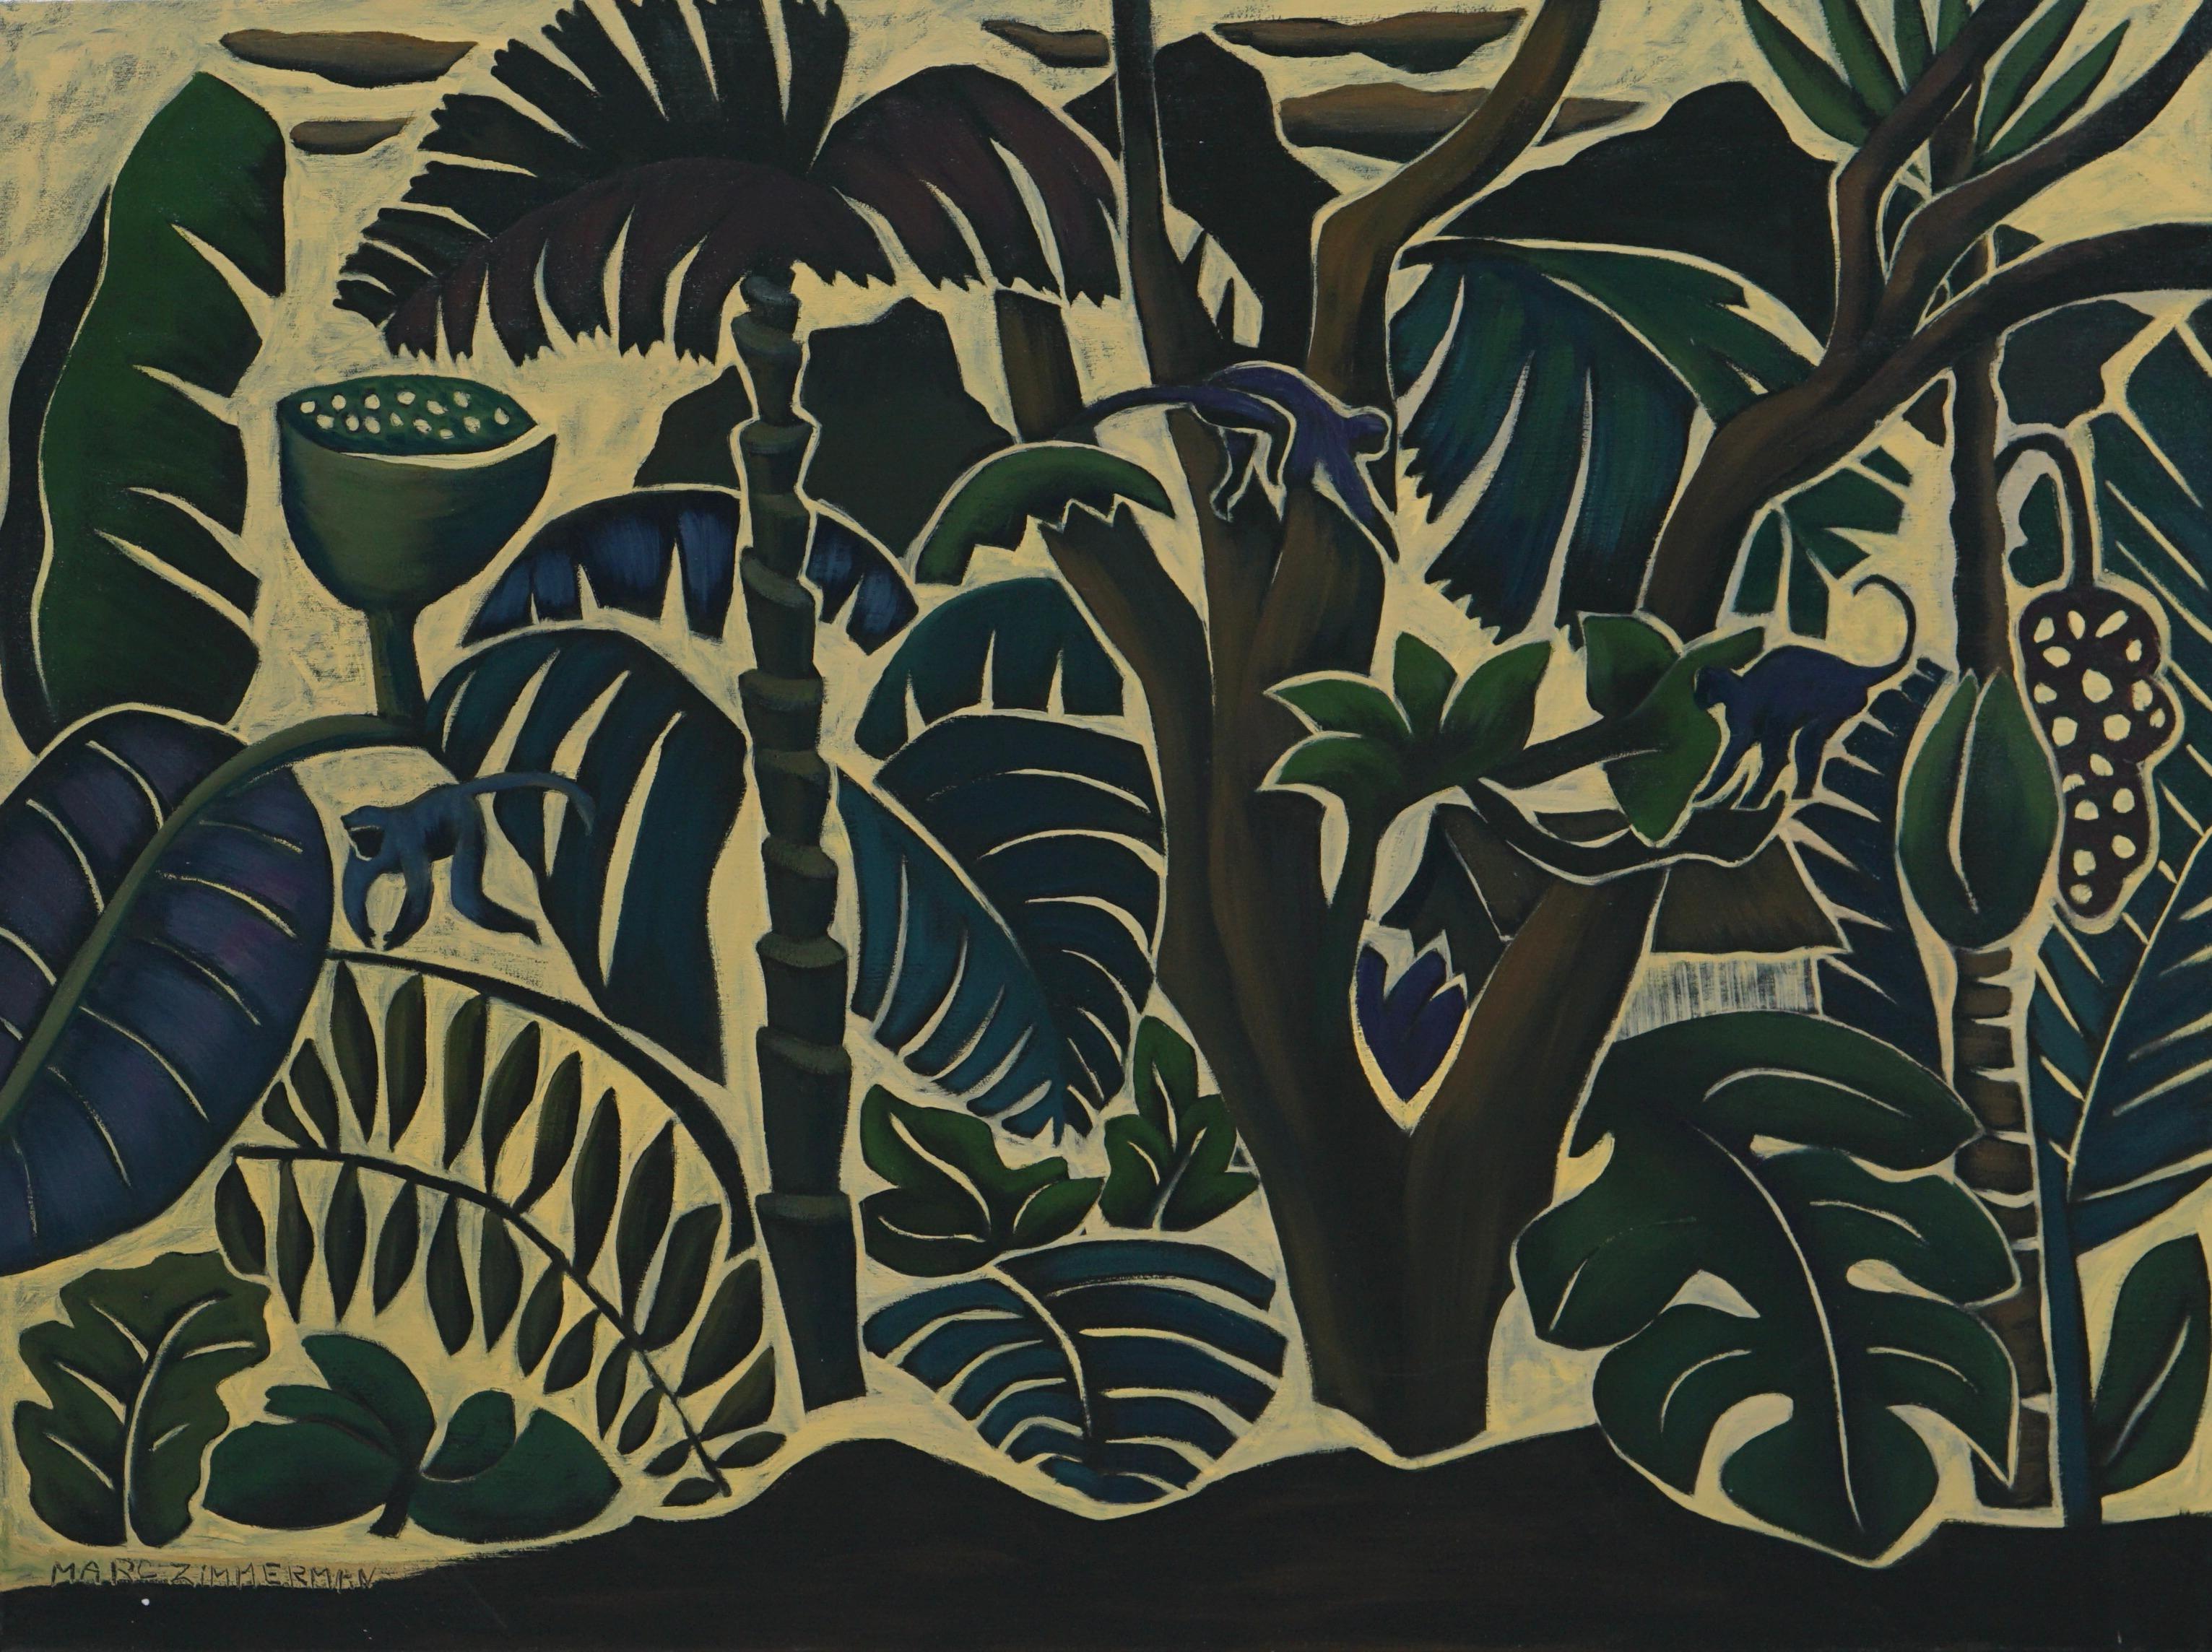 Spreading palms and ferns, trees and leaves all arranged in a woodcut style in this tropical jungle setting.

Tonal Jungle -  Landscape Paintings - Modern Art By Marc Zimmerman

This masterpiece is exhibited in the Zimmerman Gallery, Carmel CA.

The